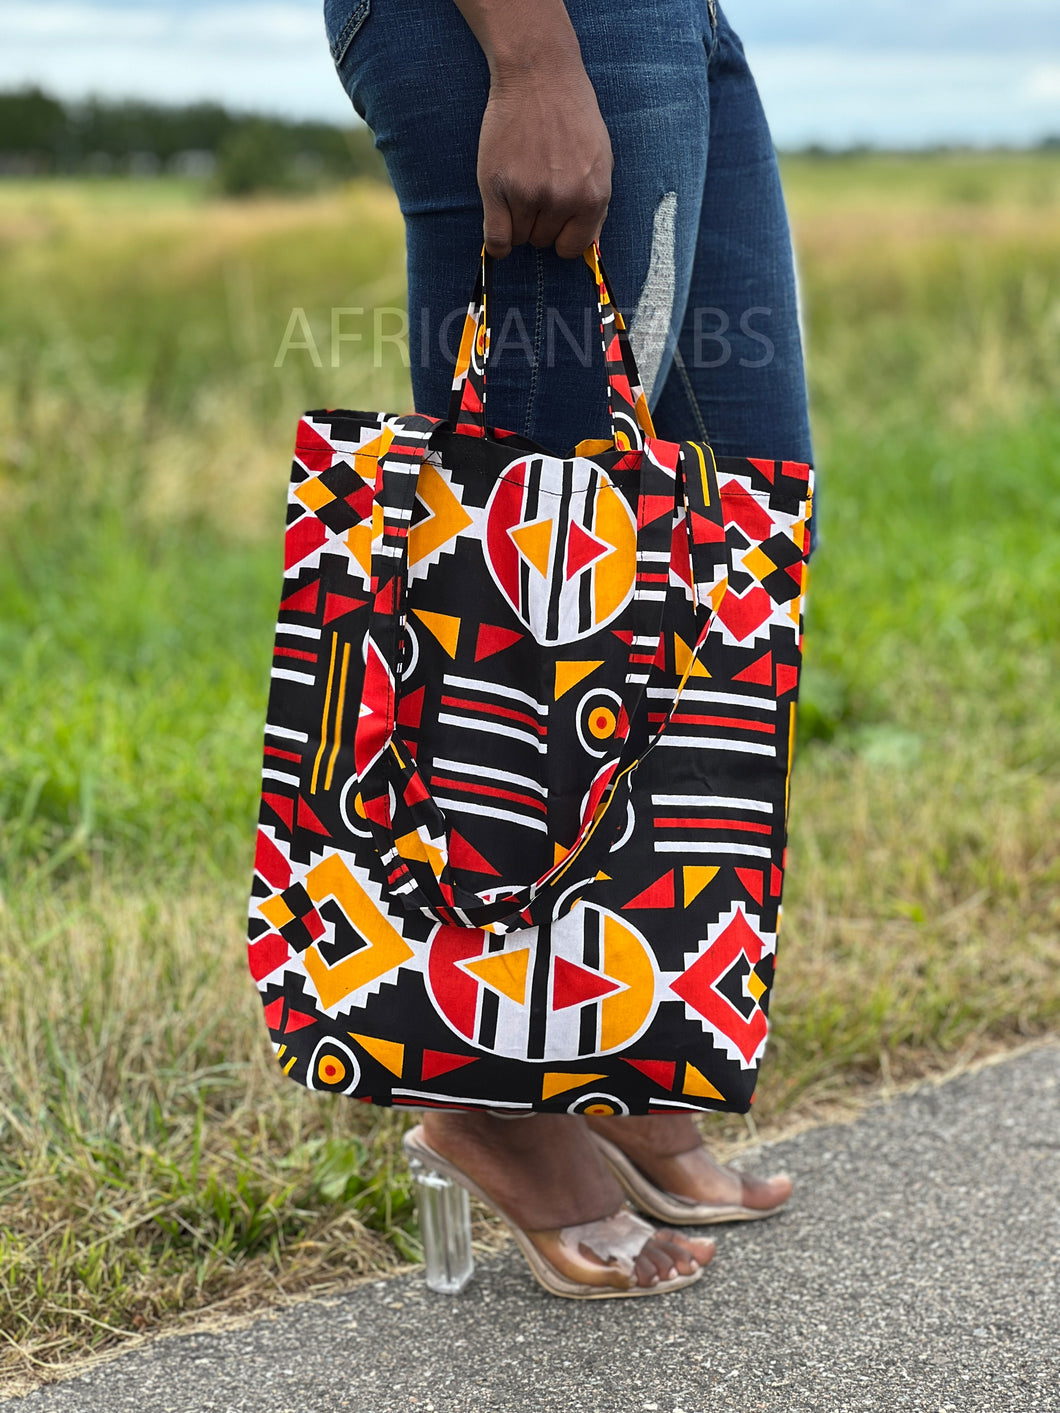 Shopper bag with African print - Red / yellow bogolan - Reusable Shopping Bag made of cotton